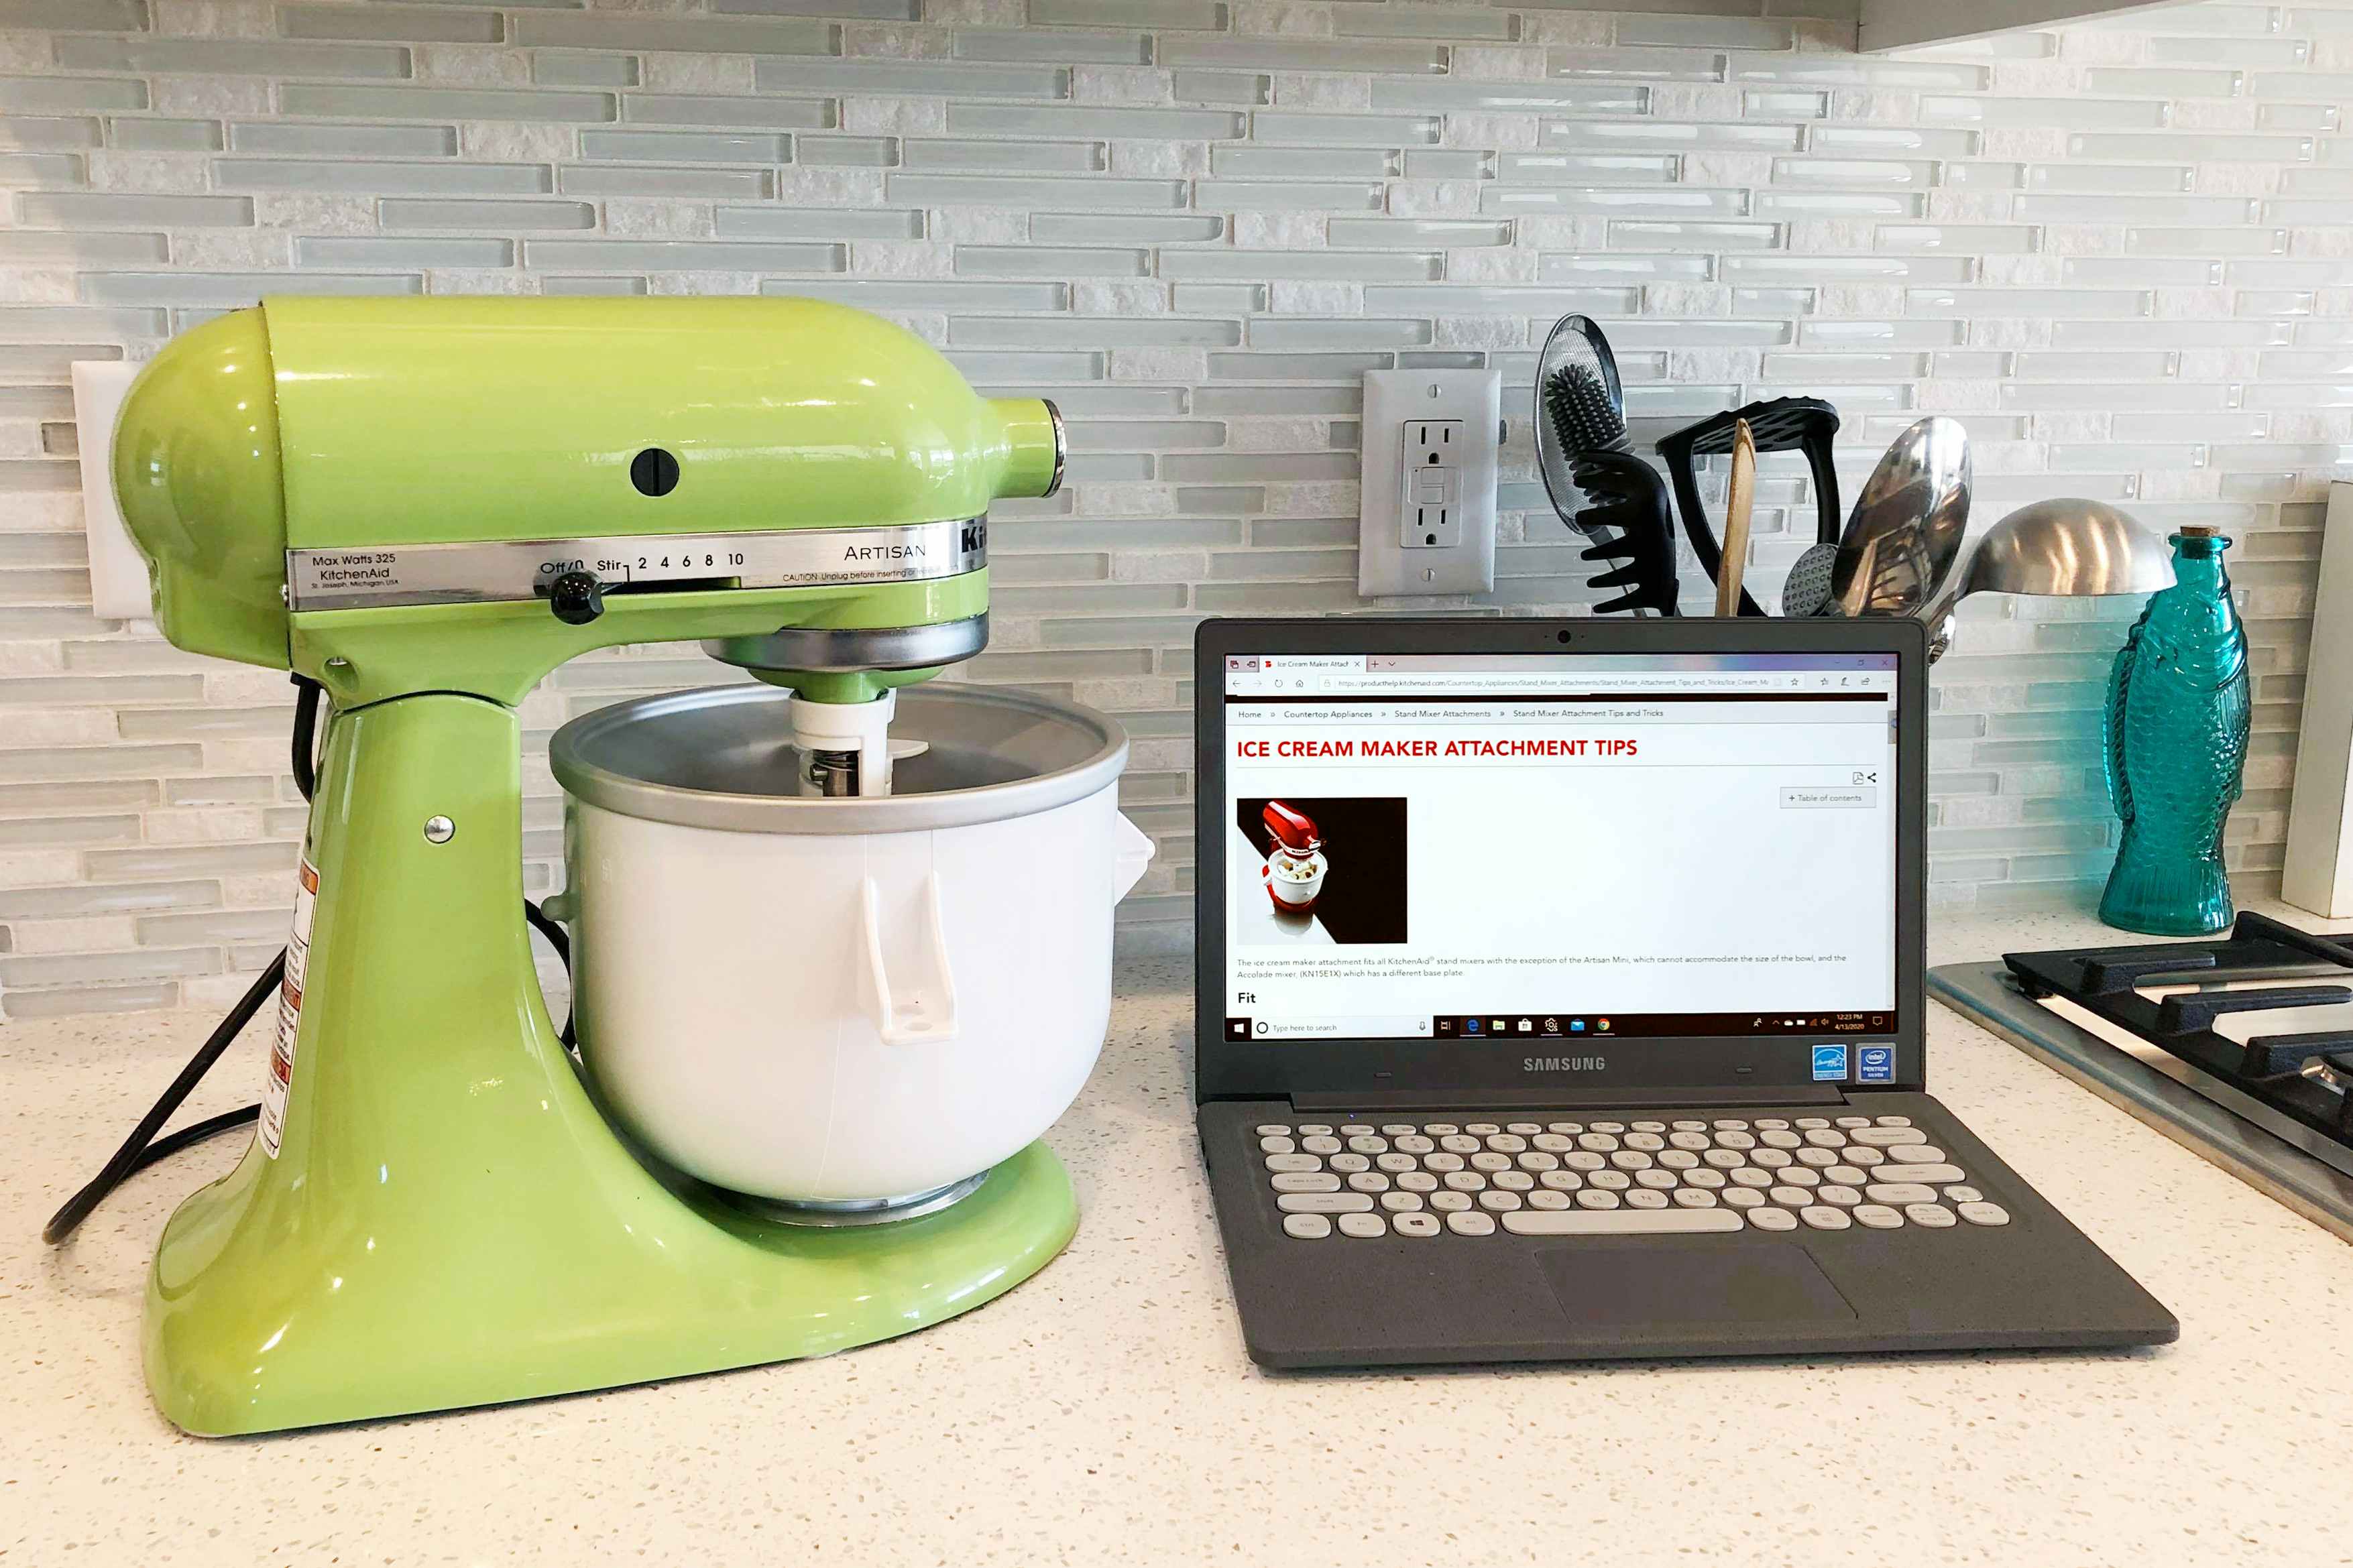 A kitchenaid ice cream maker next to a laptop with an instruction manual on the screen.